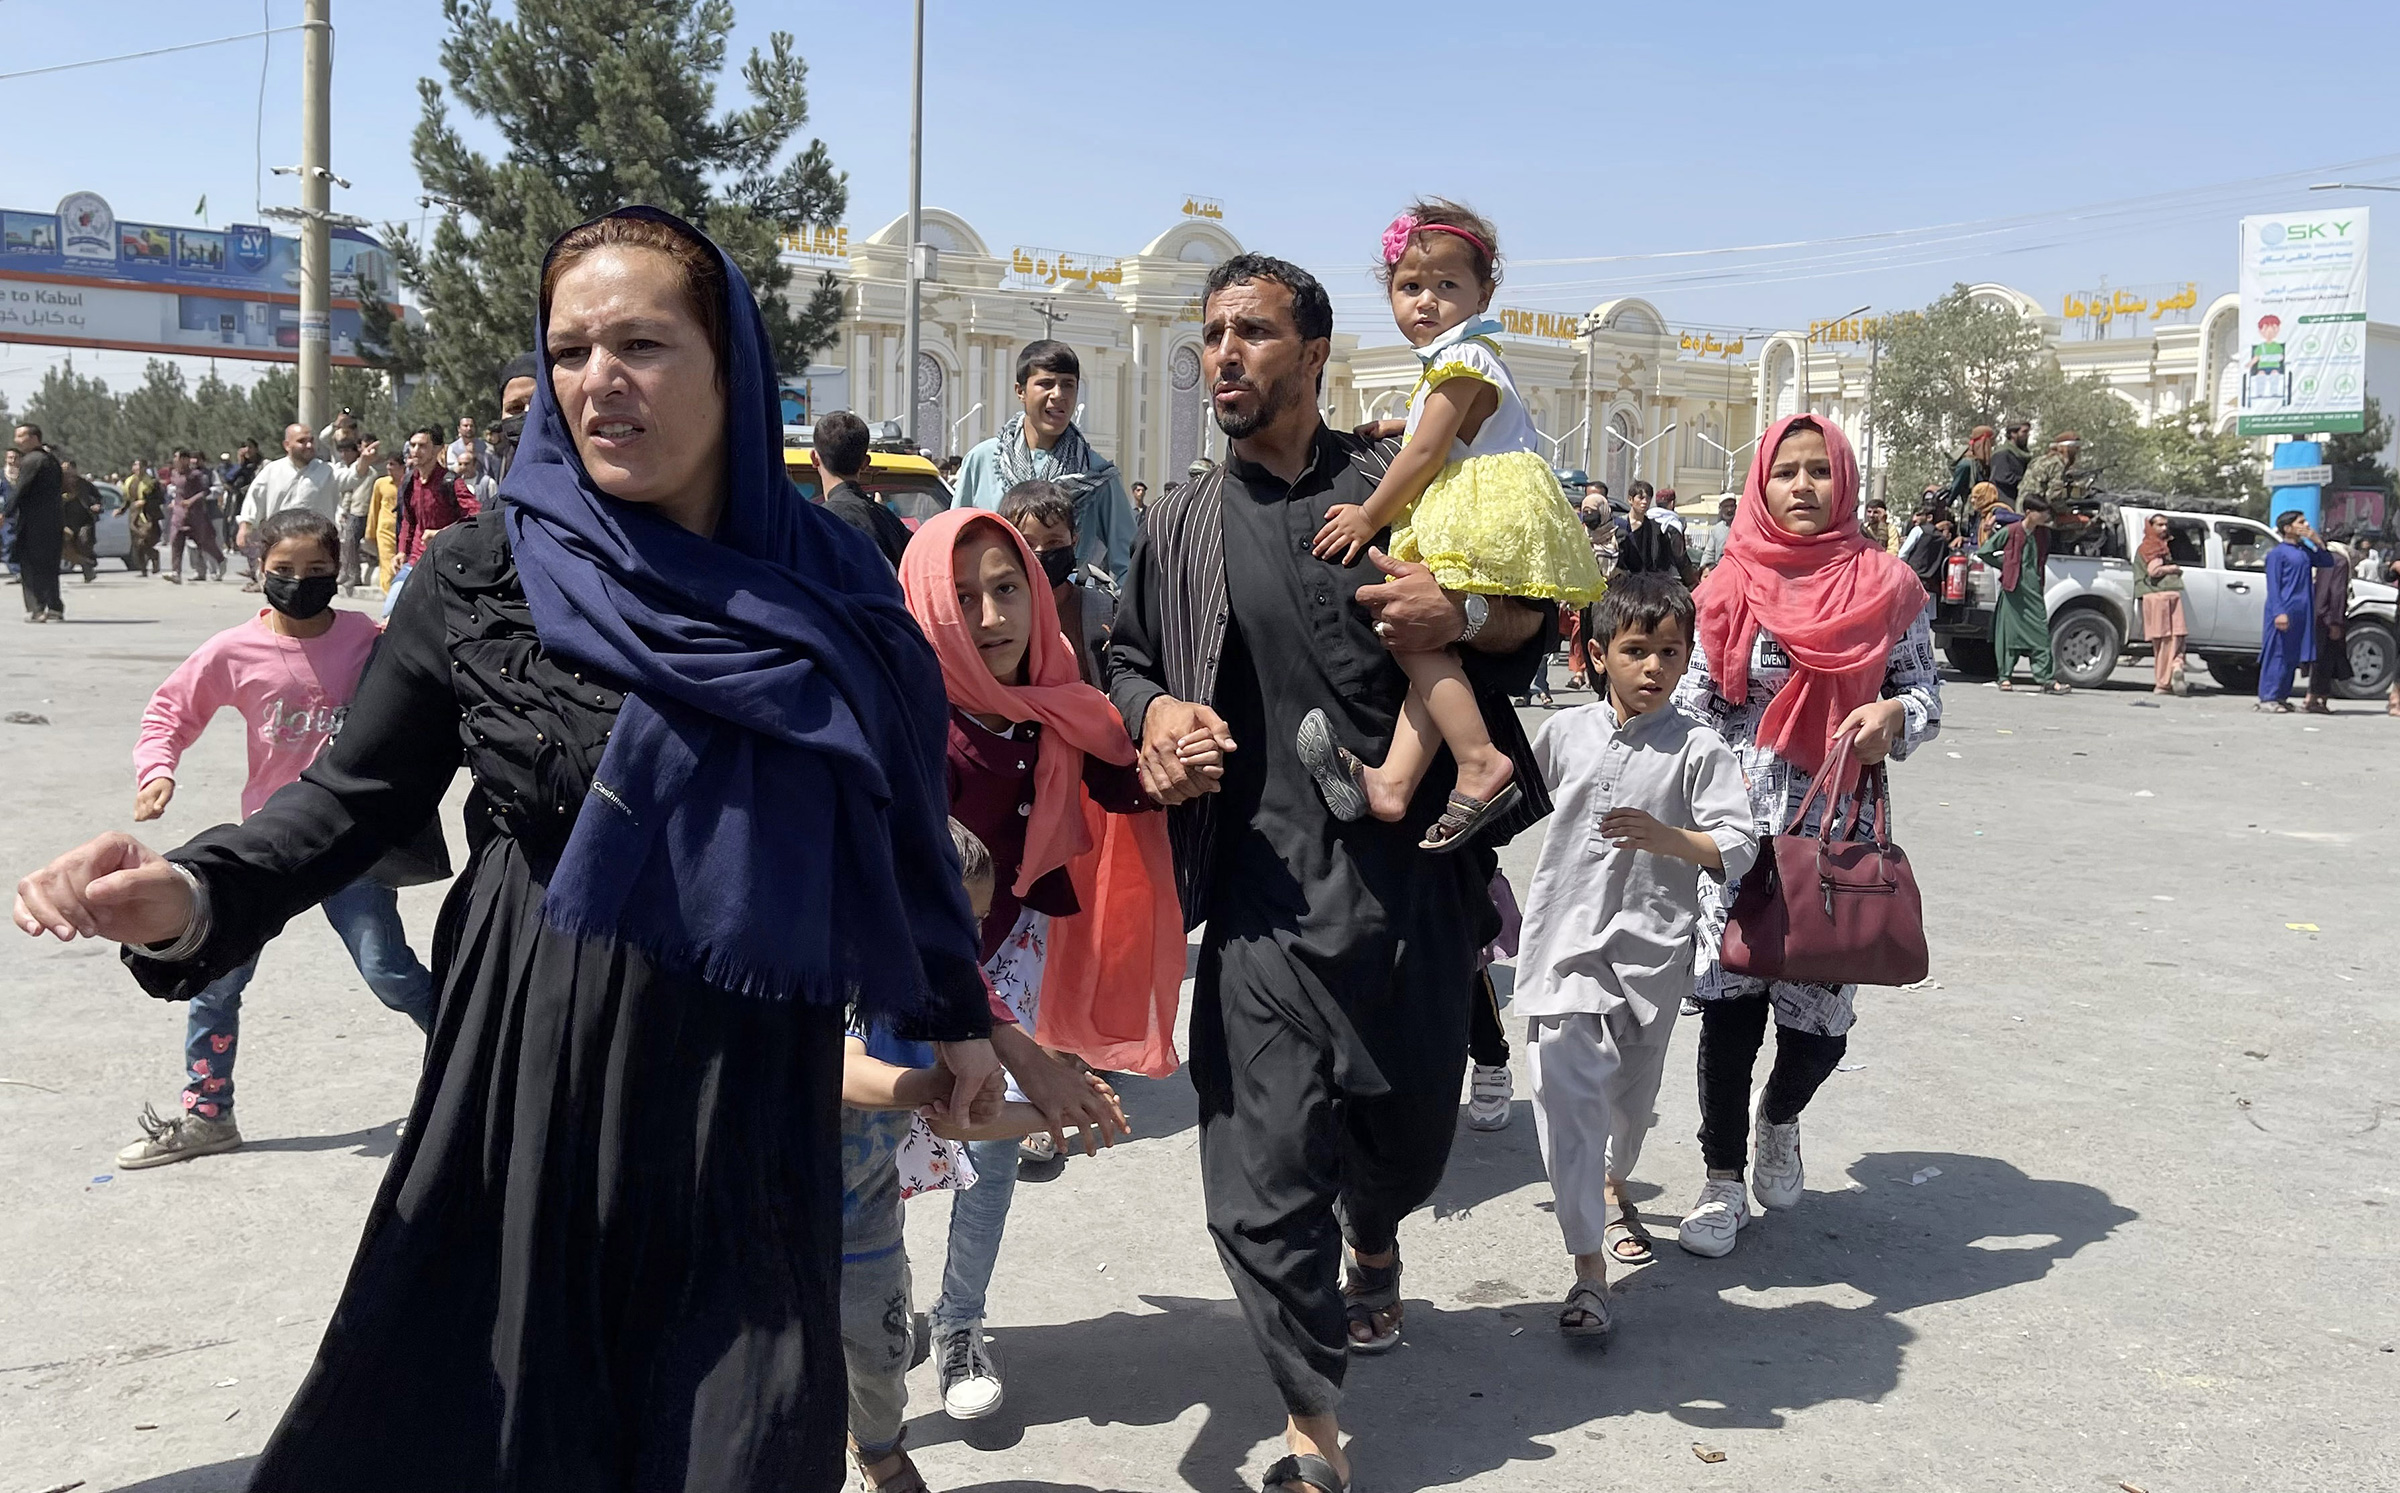 An Afghan family rushes to the Hamid Karzai International Airport as they flee Kabul, Afghanistan, on August 16, 2021. (Haroon Sabawoon—Anadolu Agency/Getty Images)